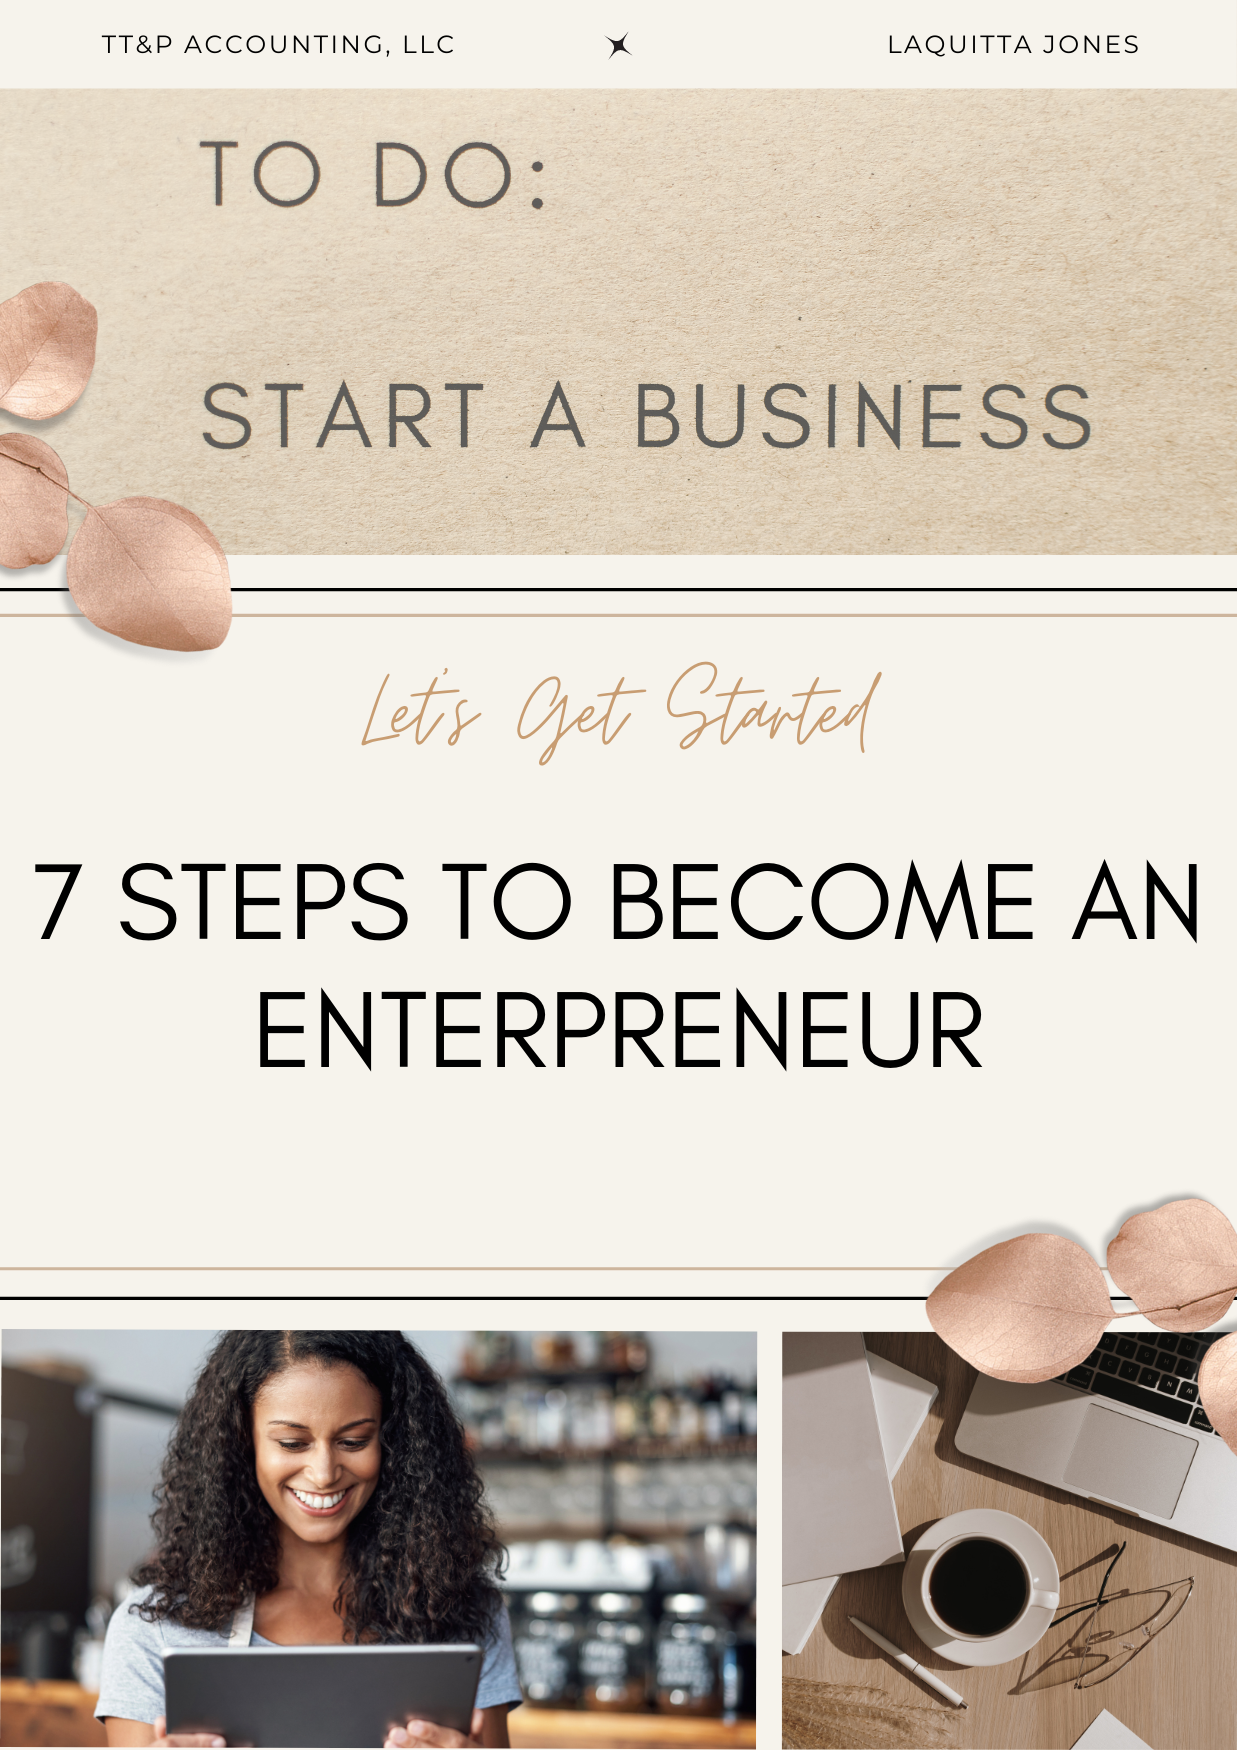 7 Steps to Getting Started as an Entrepreneur